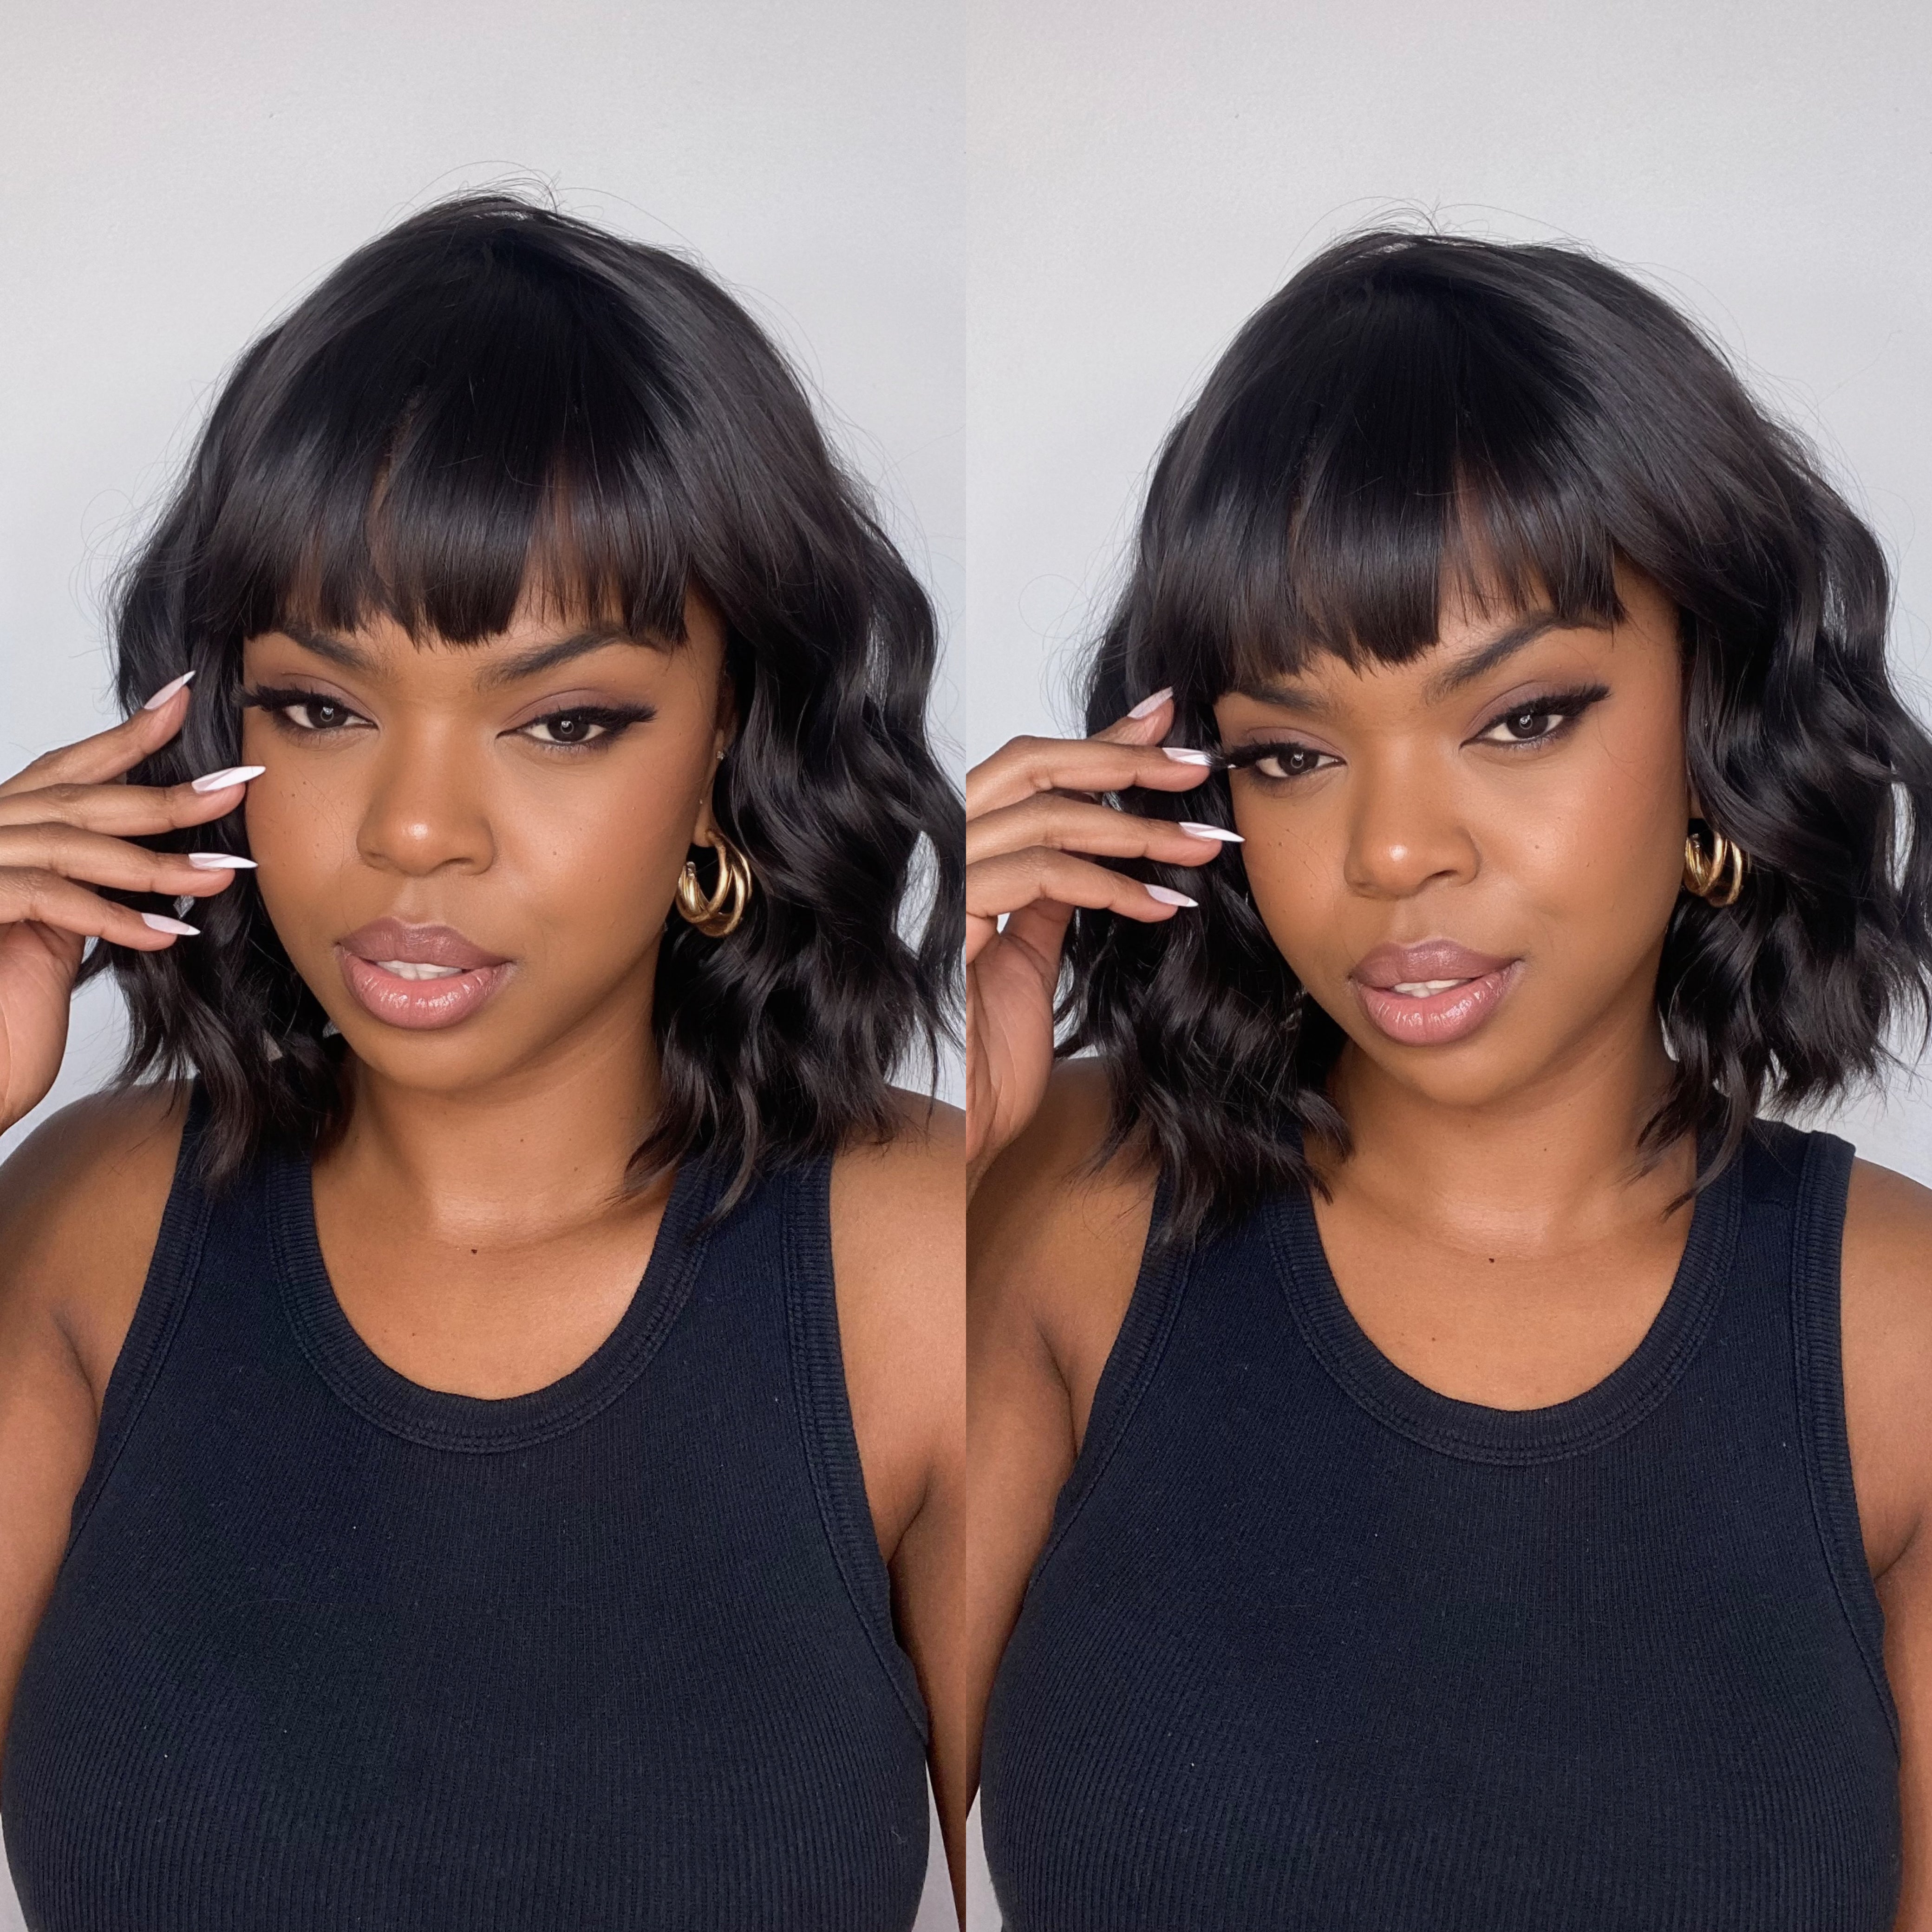 Toyotress Short Wavy Wigs With Bangs - Natural Black Bob Hair Wigs For Black Women, Shoulder Length Curly Synthetic Wigs